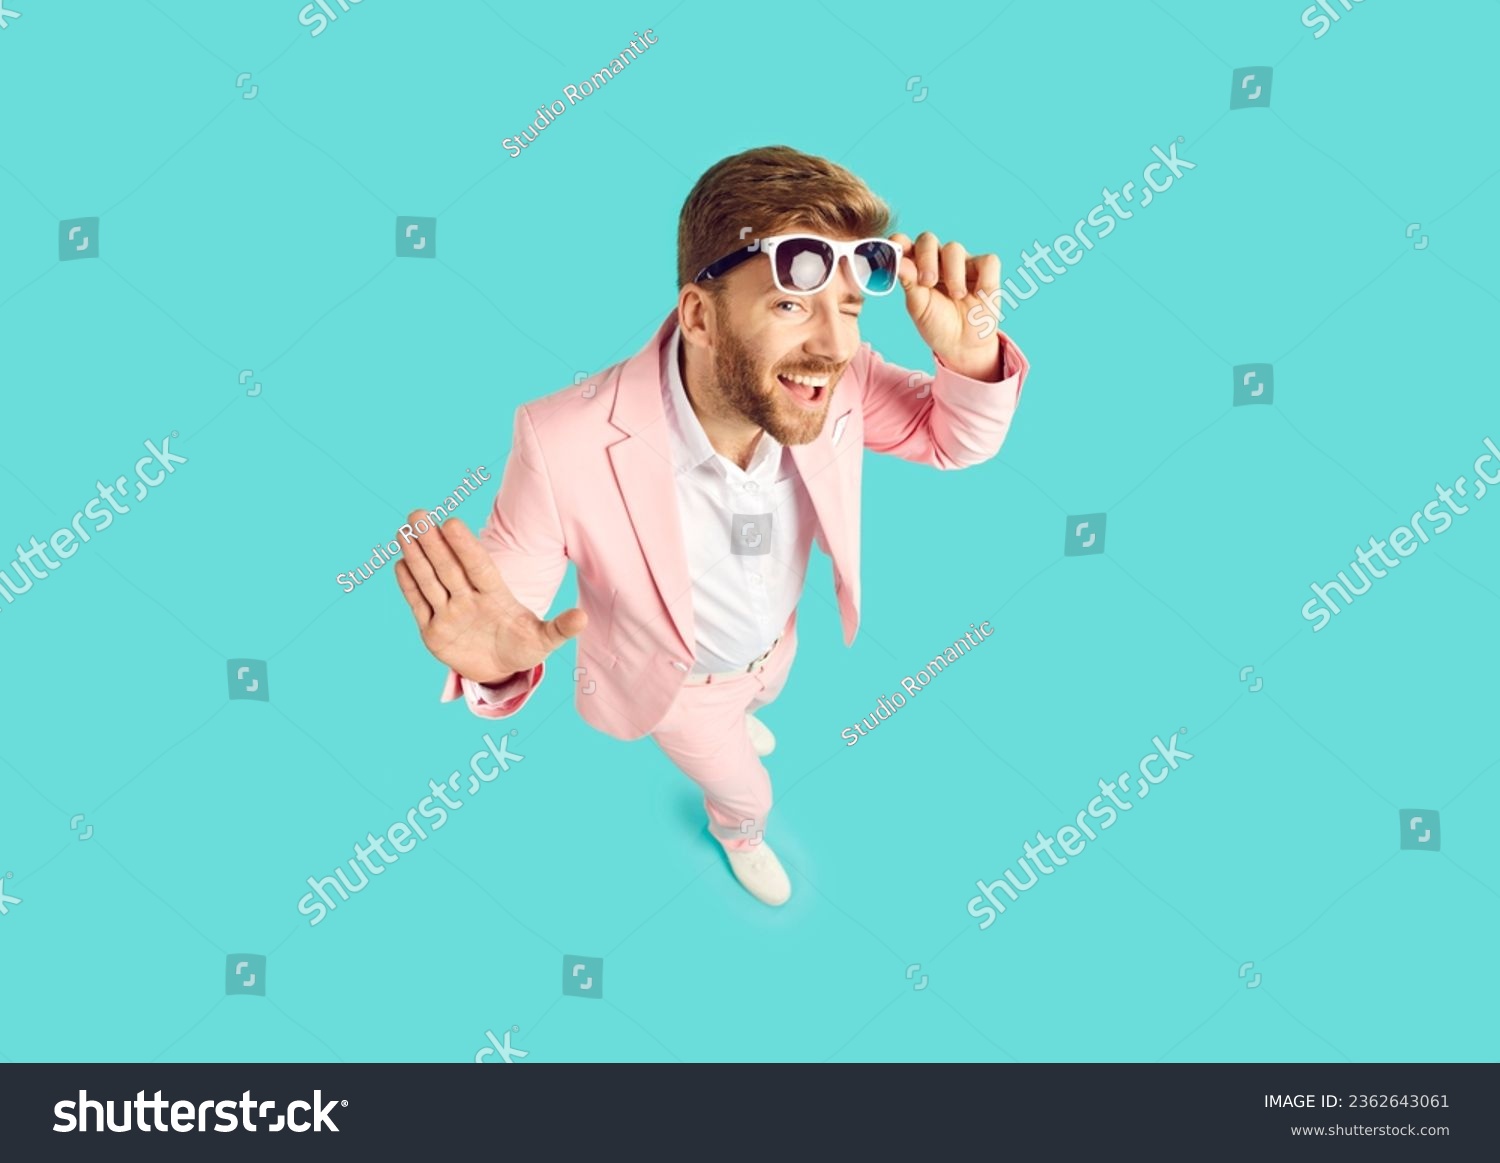 High angle shot from above of happy cheeky handsome young man wearing pink suit standing on blue color background looking at camera, smiling, taking off sunglasses and winking his eye. Fashion concept #2362643061